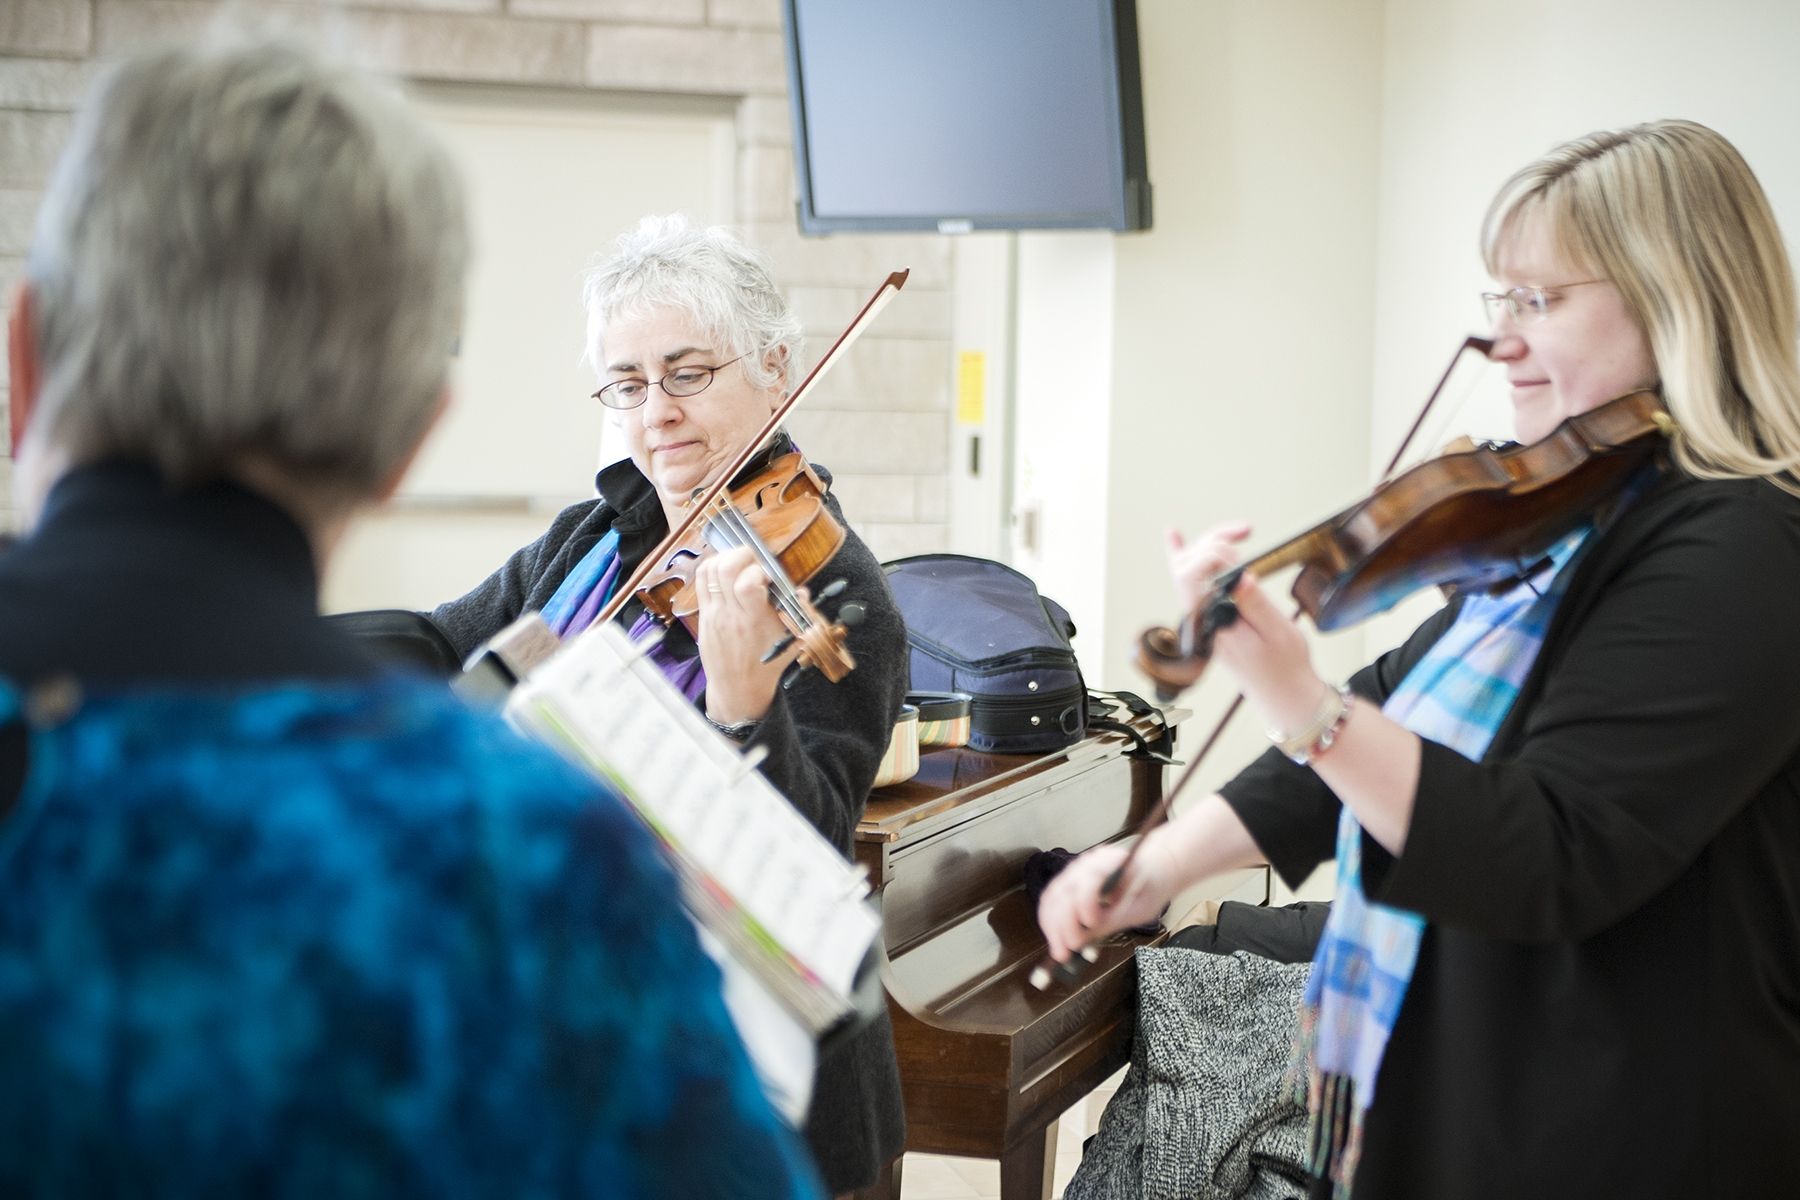 Members of the Triola Trio, Gisele Dalbec Szczesniak (centre), Melinda Raymond (right) and Eileen Beaudette (left) entertained listeners in the Burr lobby with their version of Journey's hit "Don't Stop Believin."